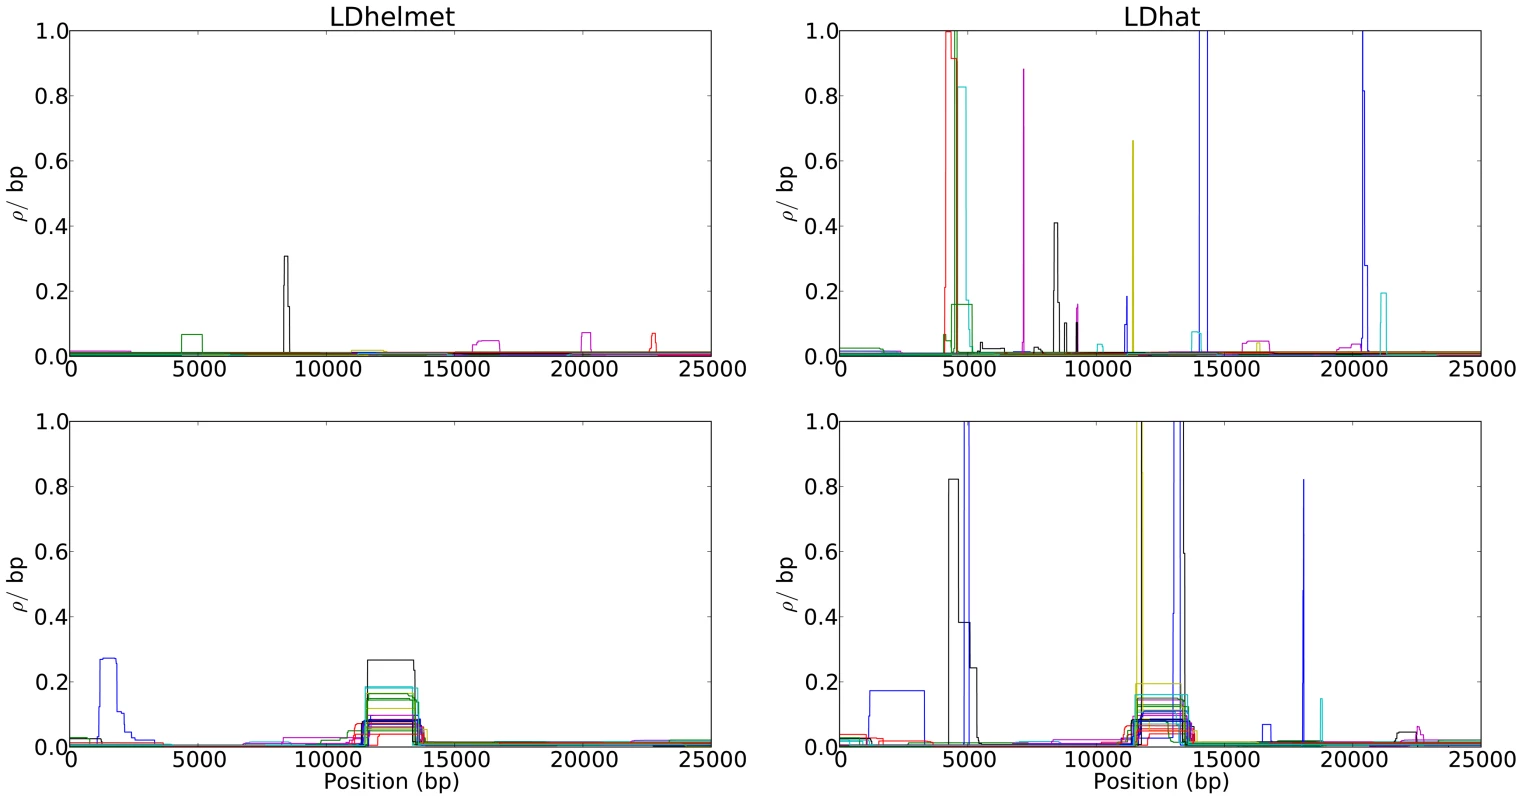 Comparison of the results of LDhelmet and LDhat for 25 datasets simulated under strong positive selection.